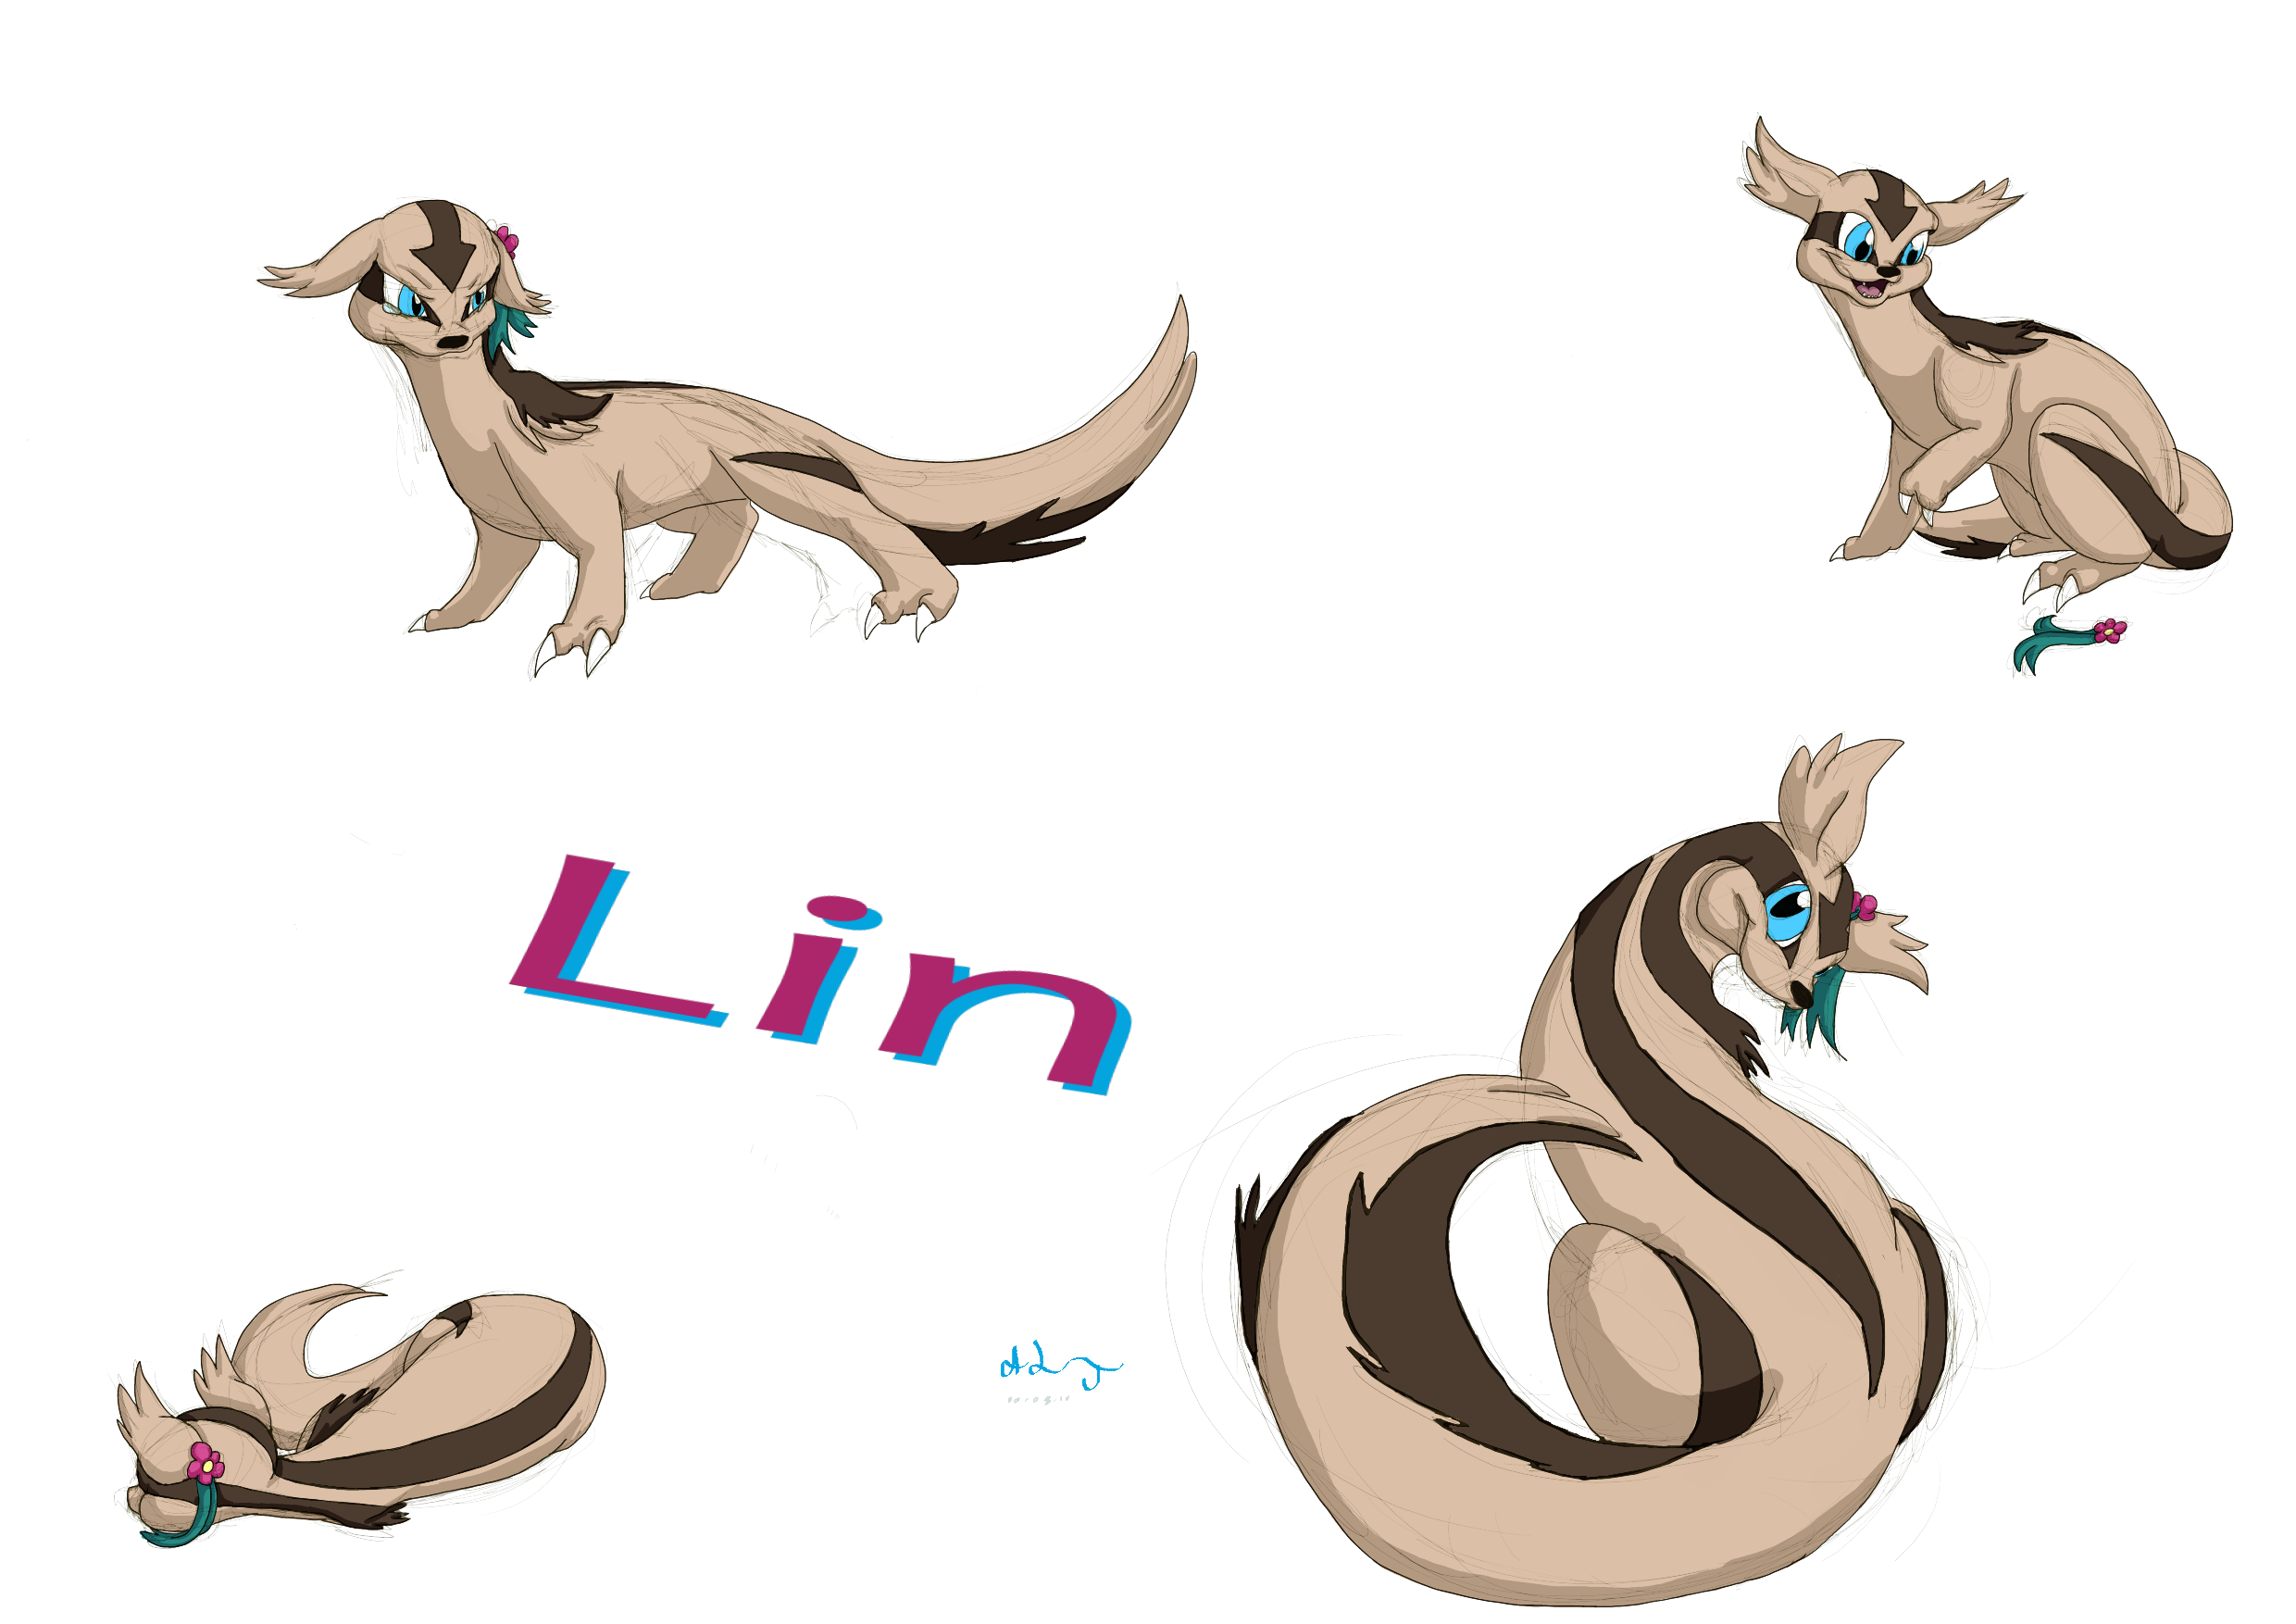 :RQ: Lin the Linoone by Cattensu on DeviantArt